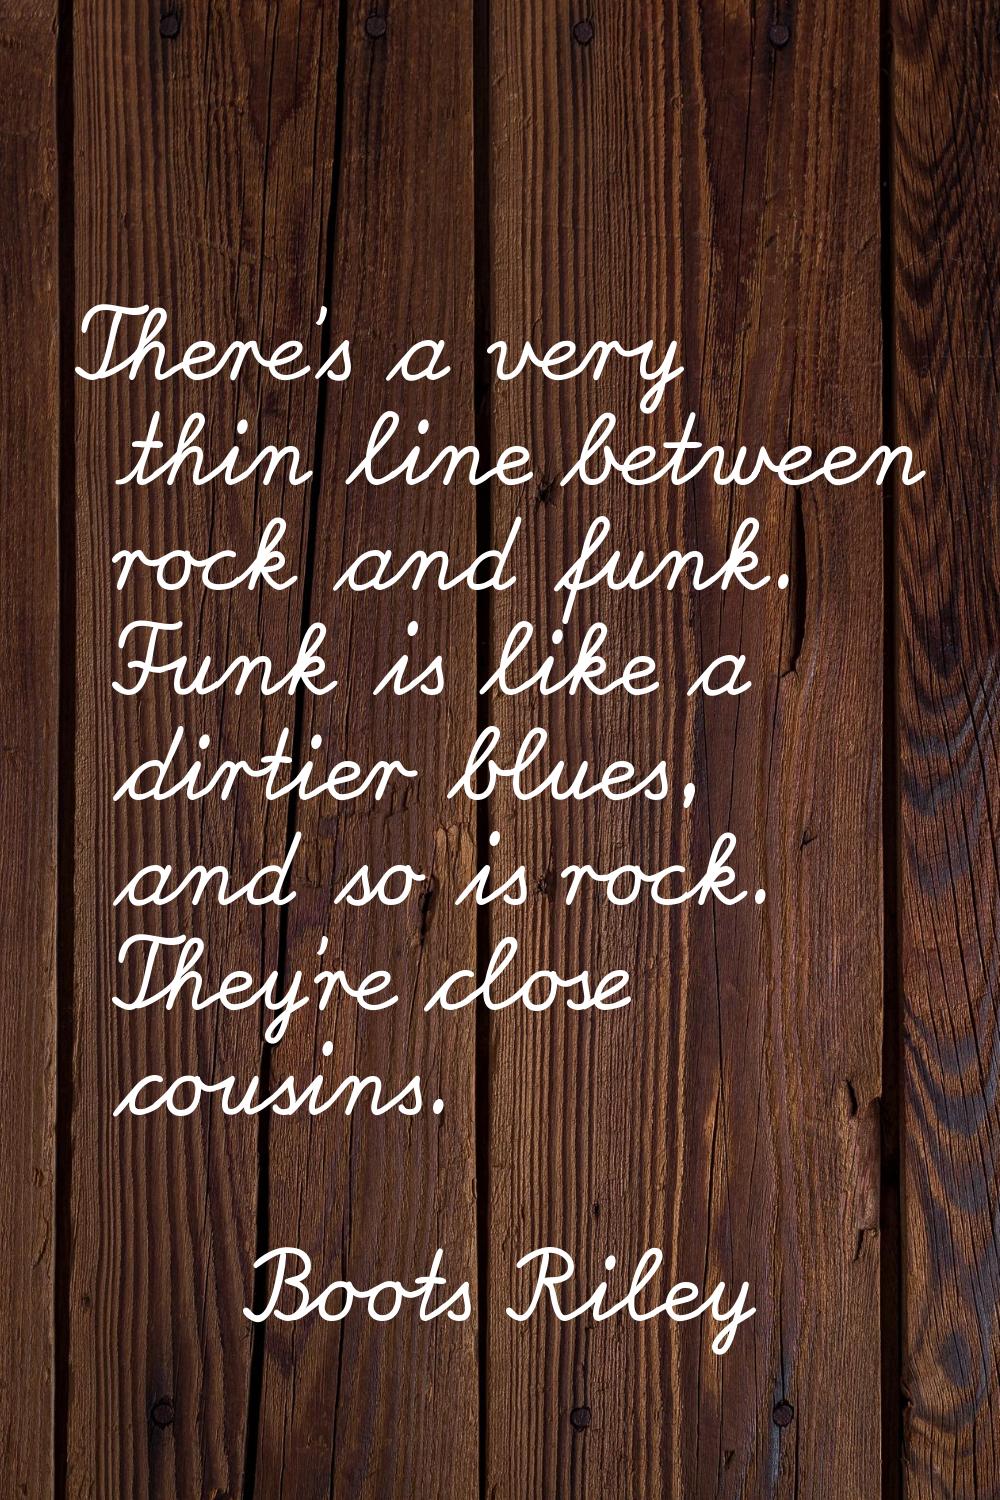 There's a very thin line between rock and funk. Funk is like a dirtier blues, and so is rock. They'